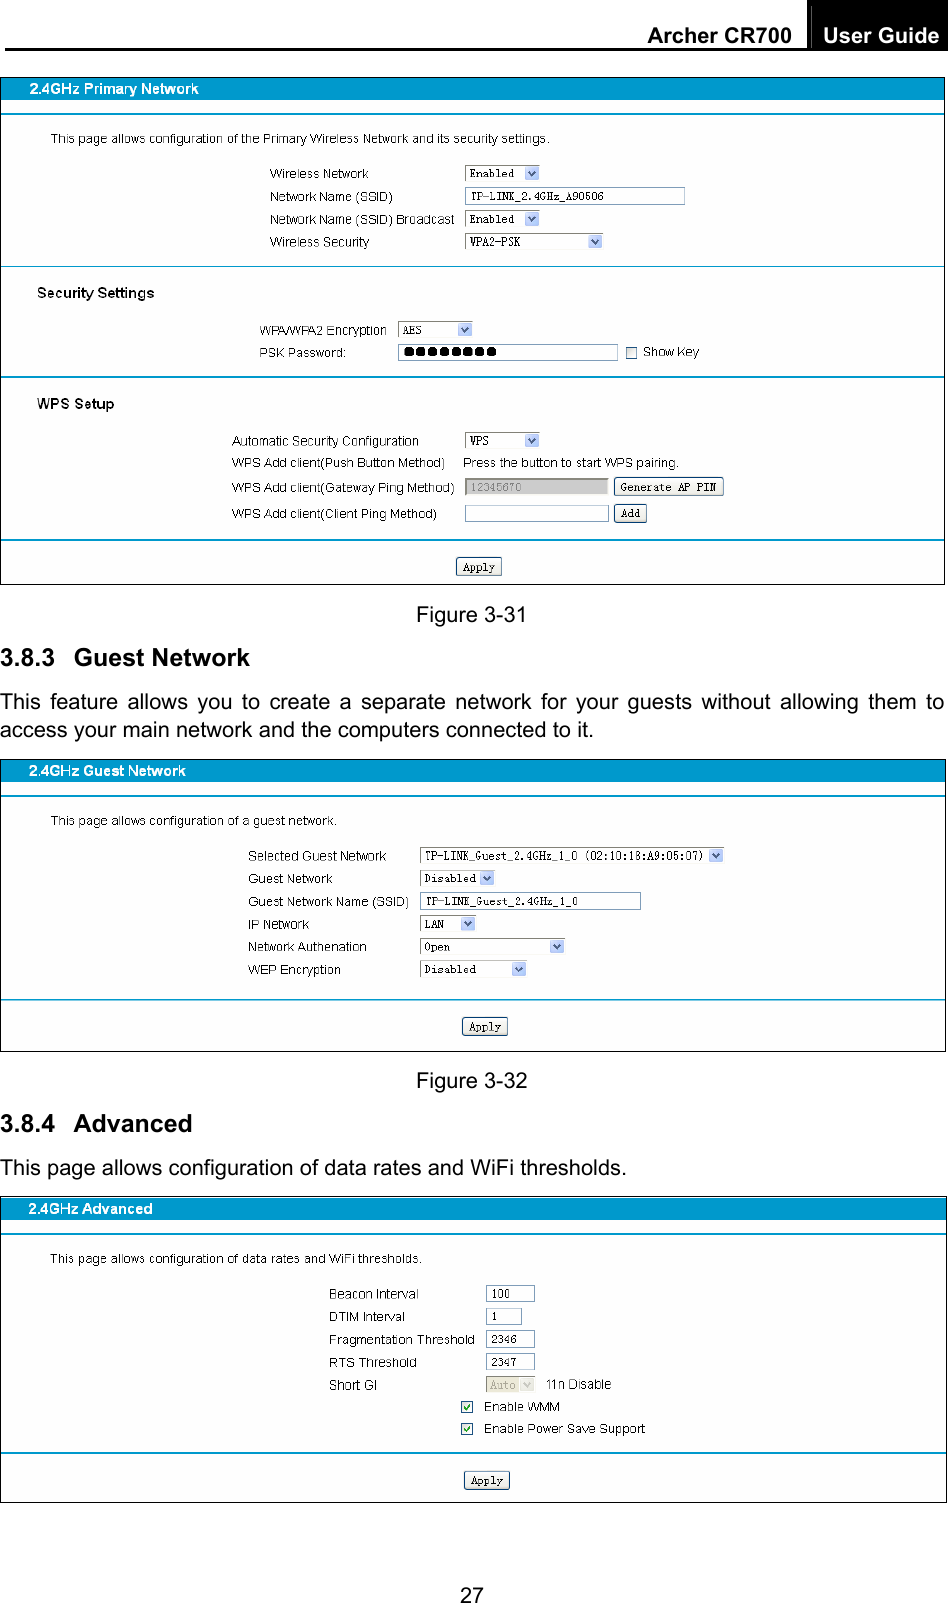 Archer CR700  User Guide 27  Figure 3-31 3.8.3  Guest Network This feature allows you to create a separate network for your guests without allowing them to access your main network and the computers connected to it.   Figure 3-32 3.8.4  Advanced This page allows configuration of data rates and WiFi thresholds.  